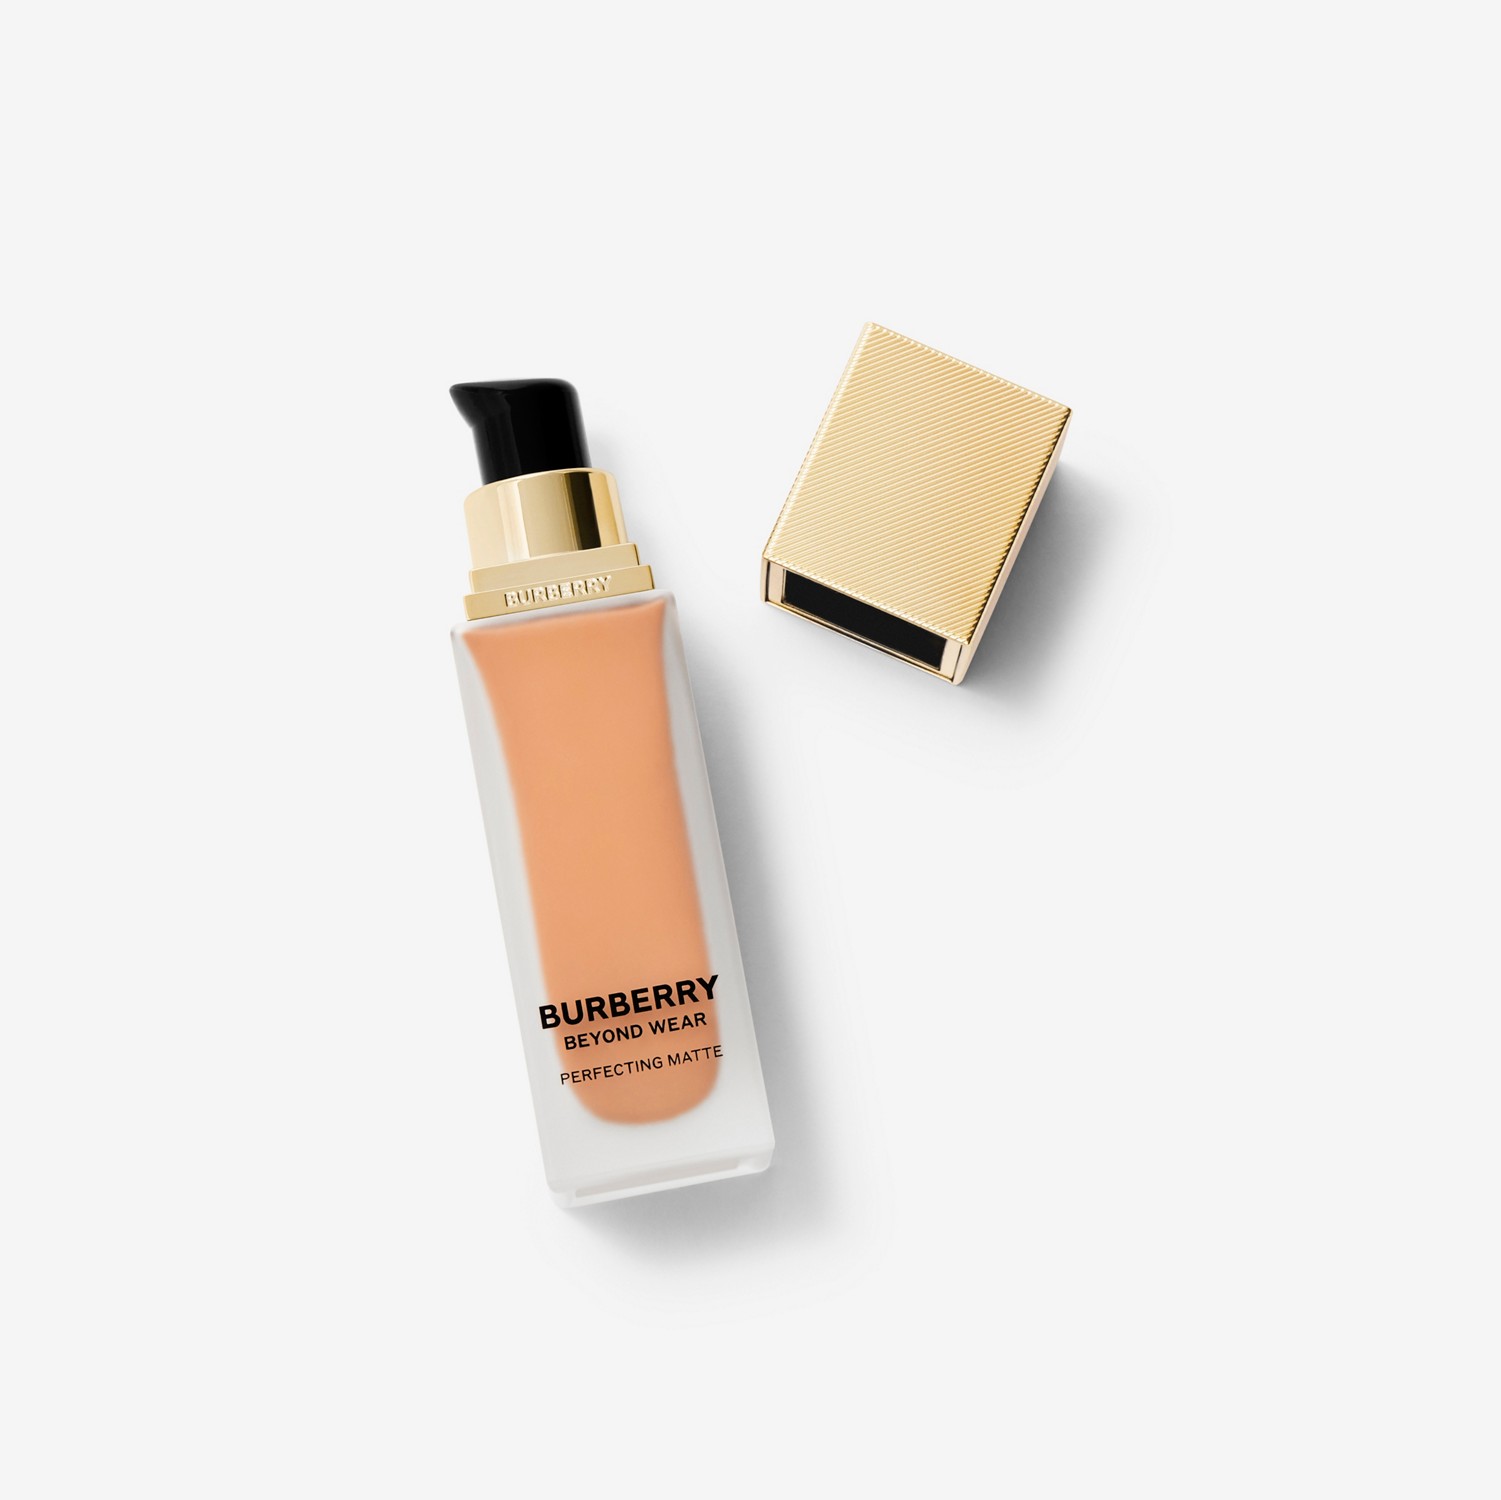 Beyond Wear Perfecting Matte Foundation – 70 Medium Cool - Mulheres | Burberry® oficial